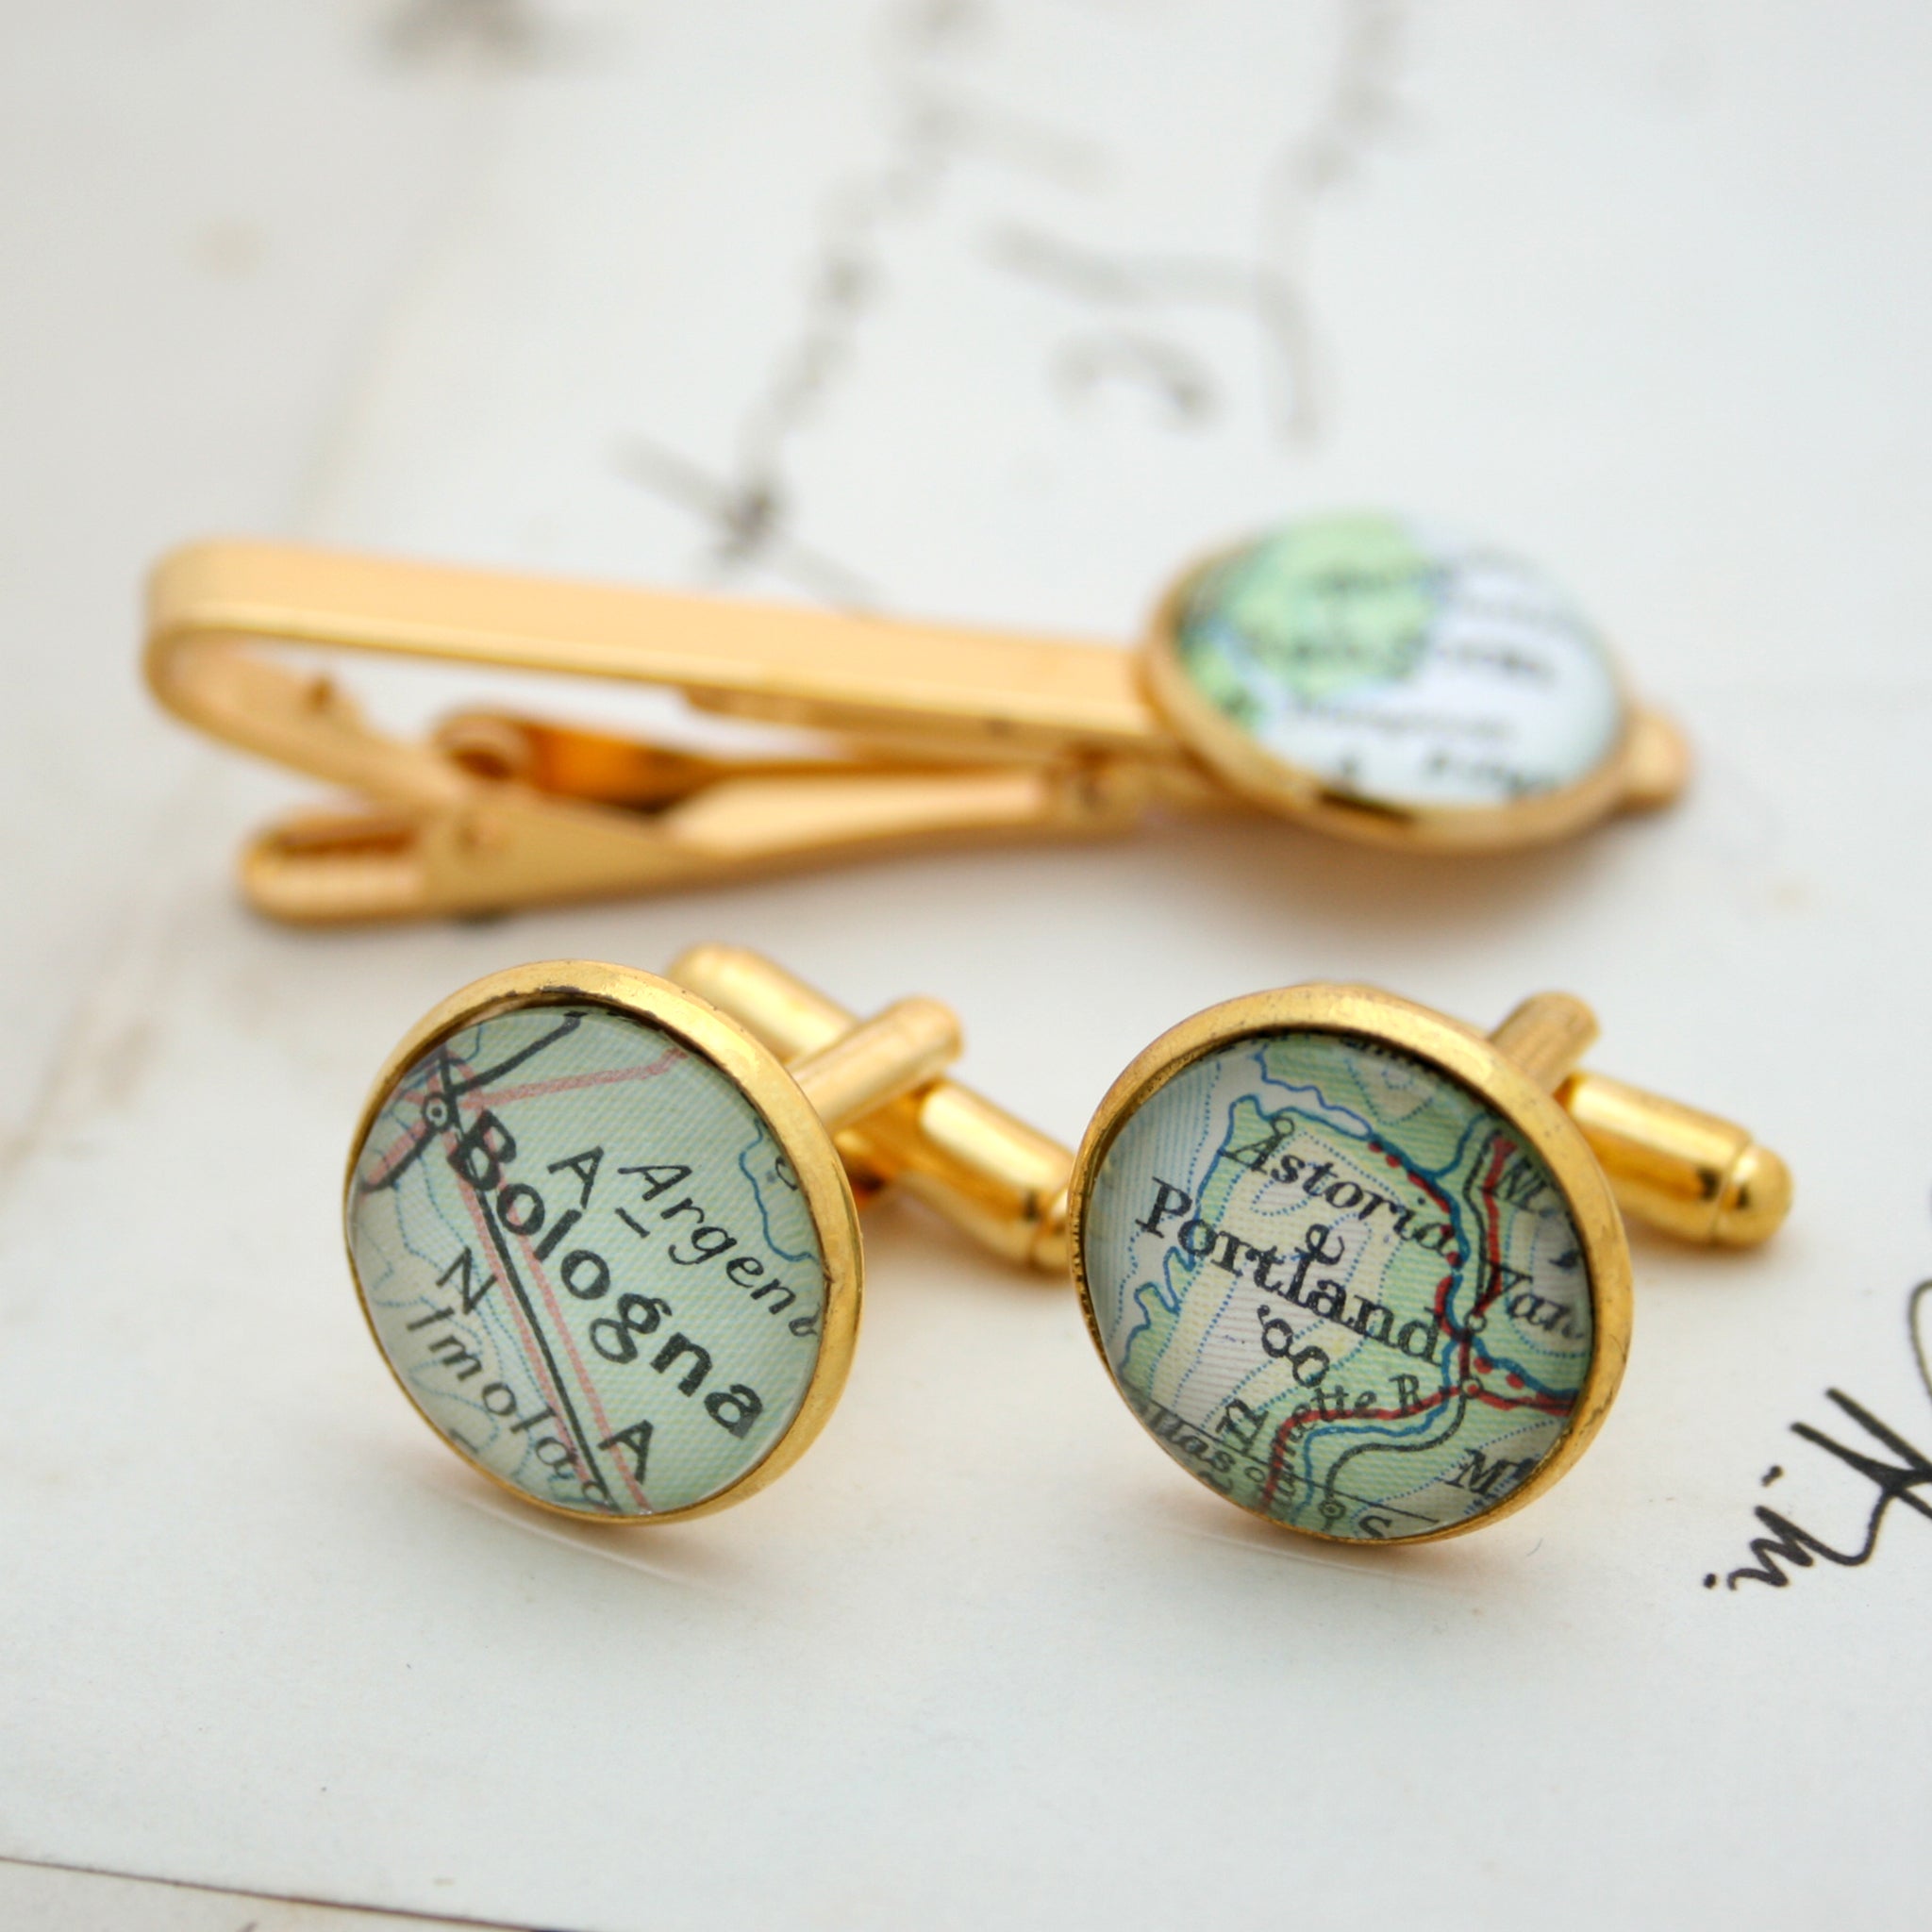 Tie clip and cufflinks in gold color featuring selection of map locations